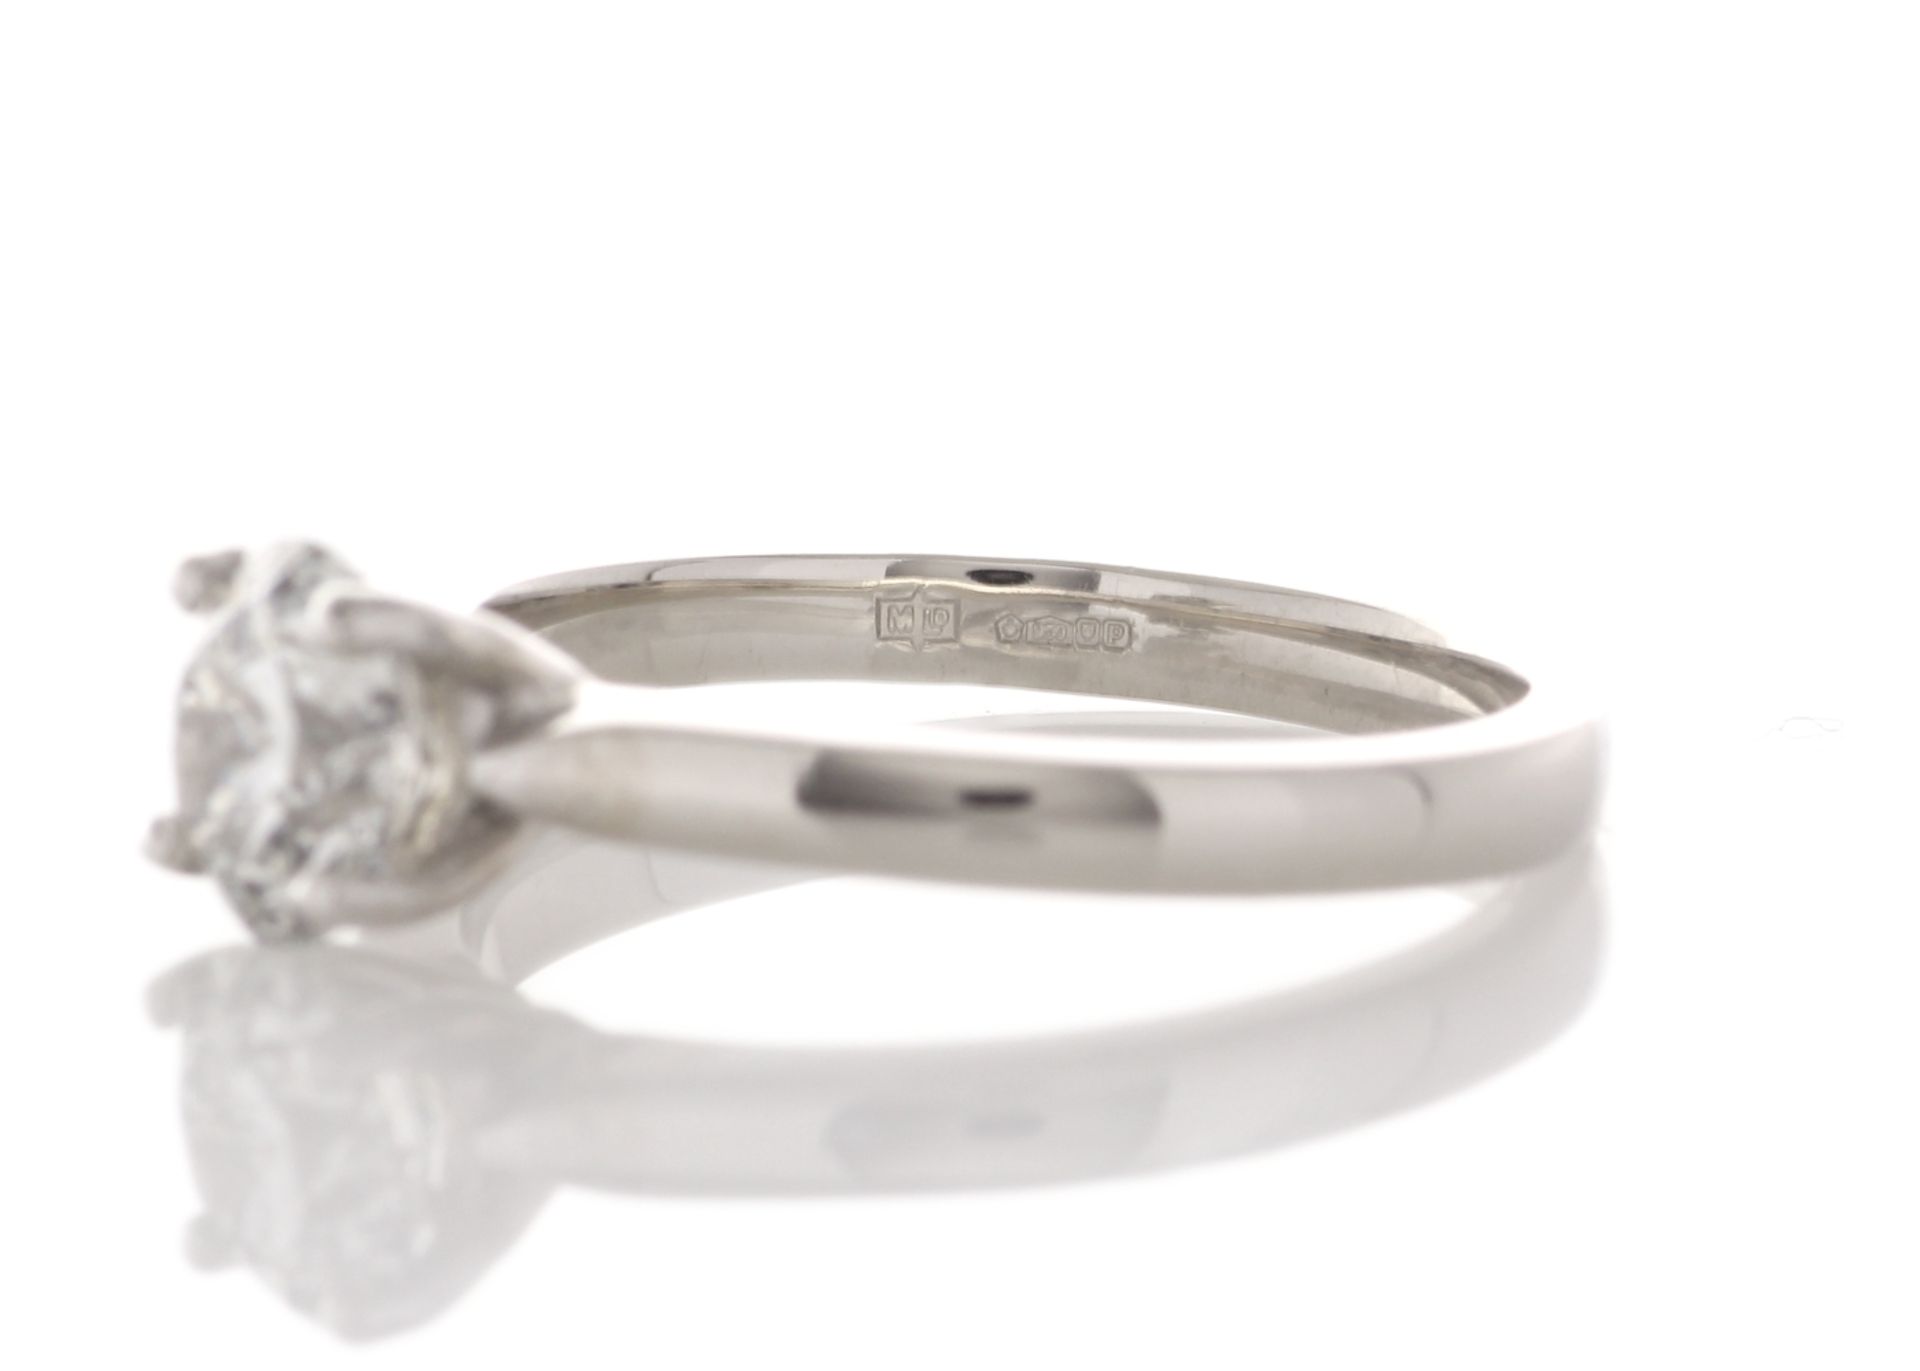 Platinum Single Stone Claw Set Diamond Ring 1.07 Carats - Valued By GIE £24,610.00 - A stunning - Image 3 of 4